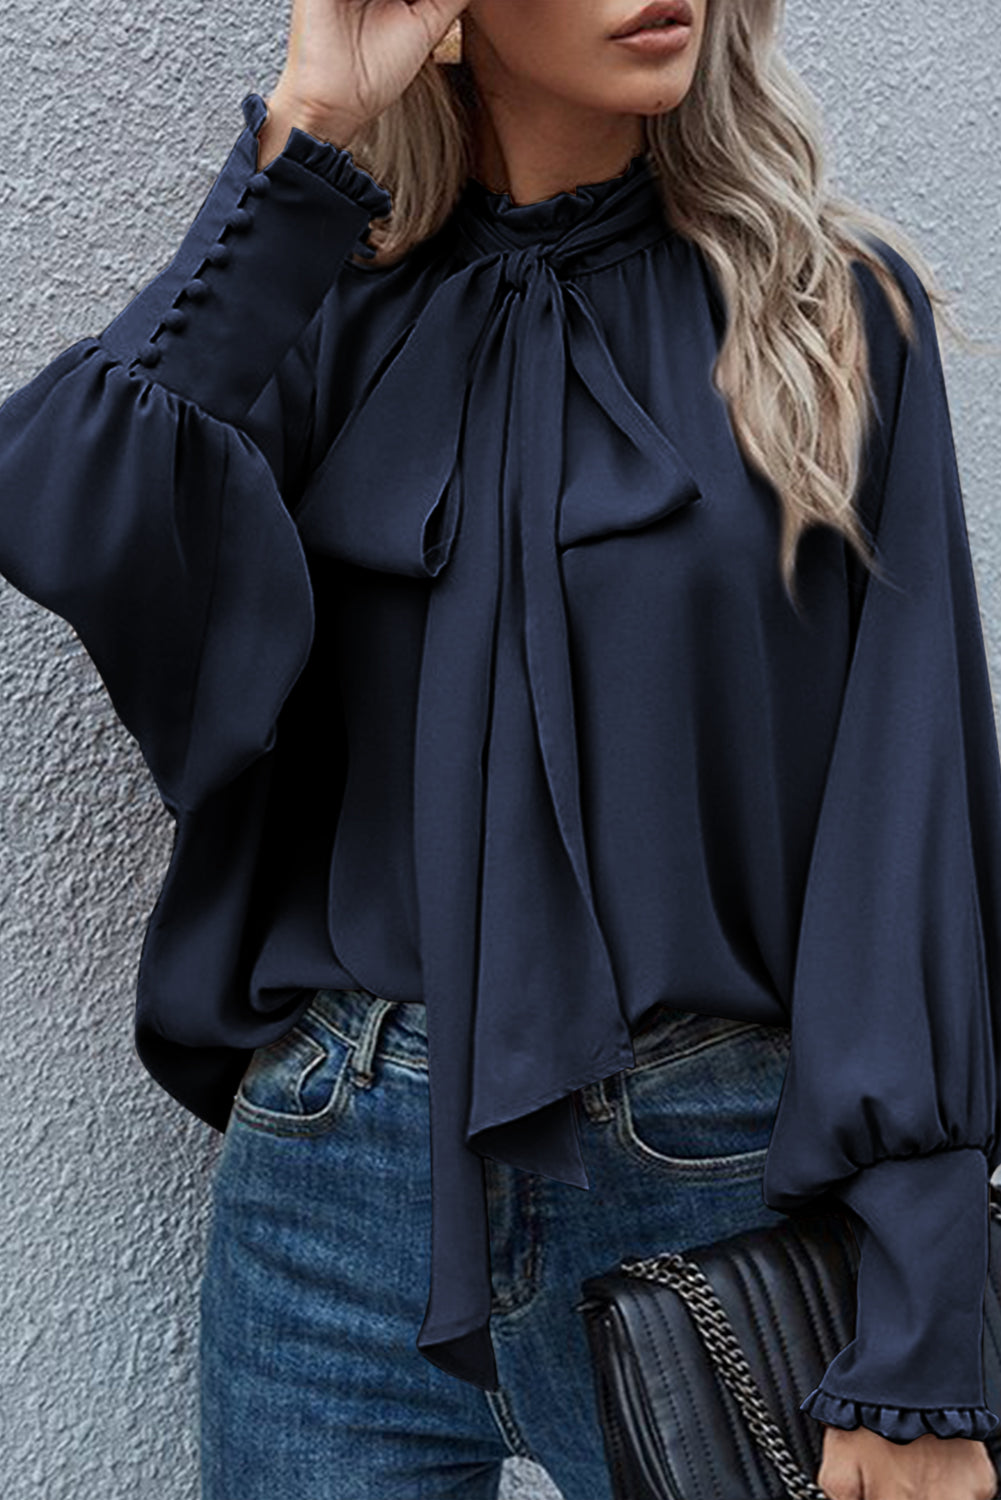 Jungle green frilled knotted mock neck bishop sleeve blouse - navy blue / l / 100% polyester - blouses & shirts